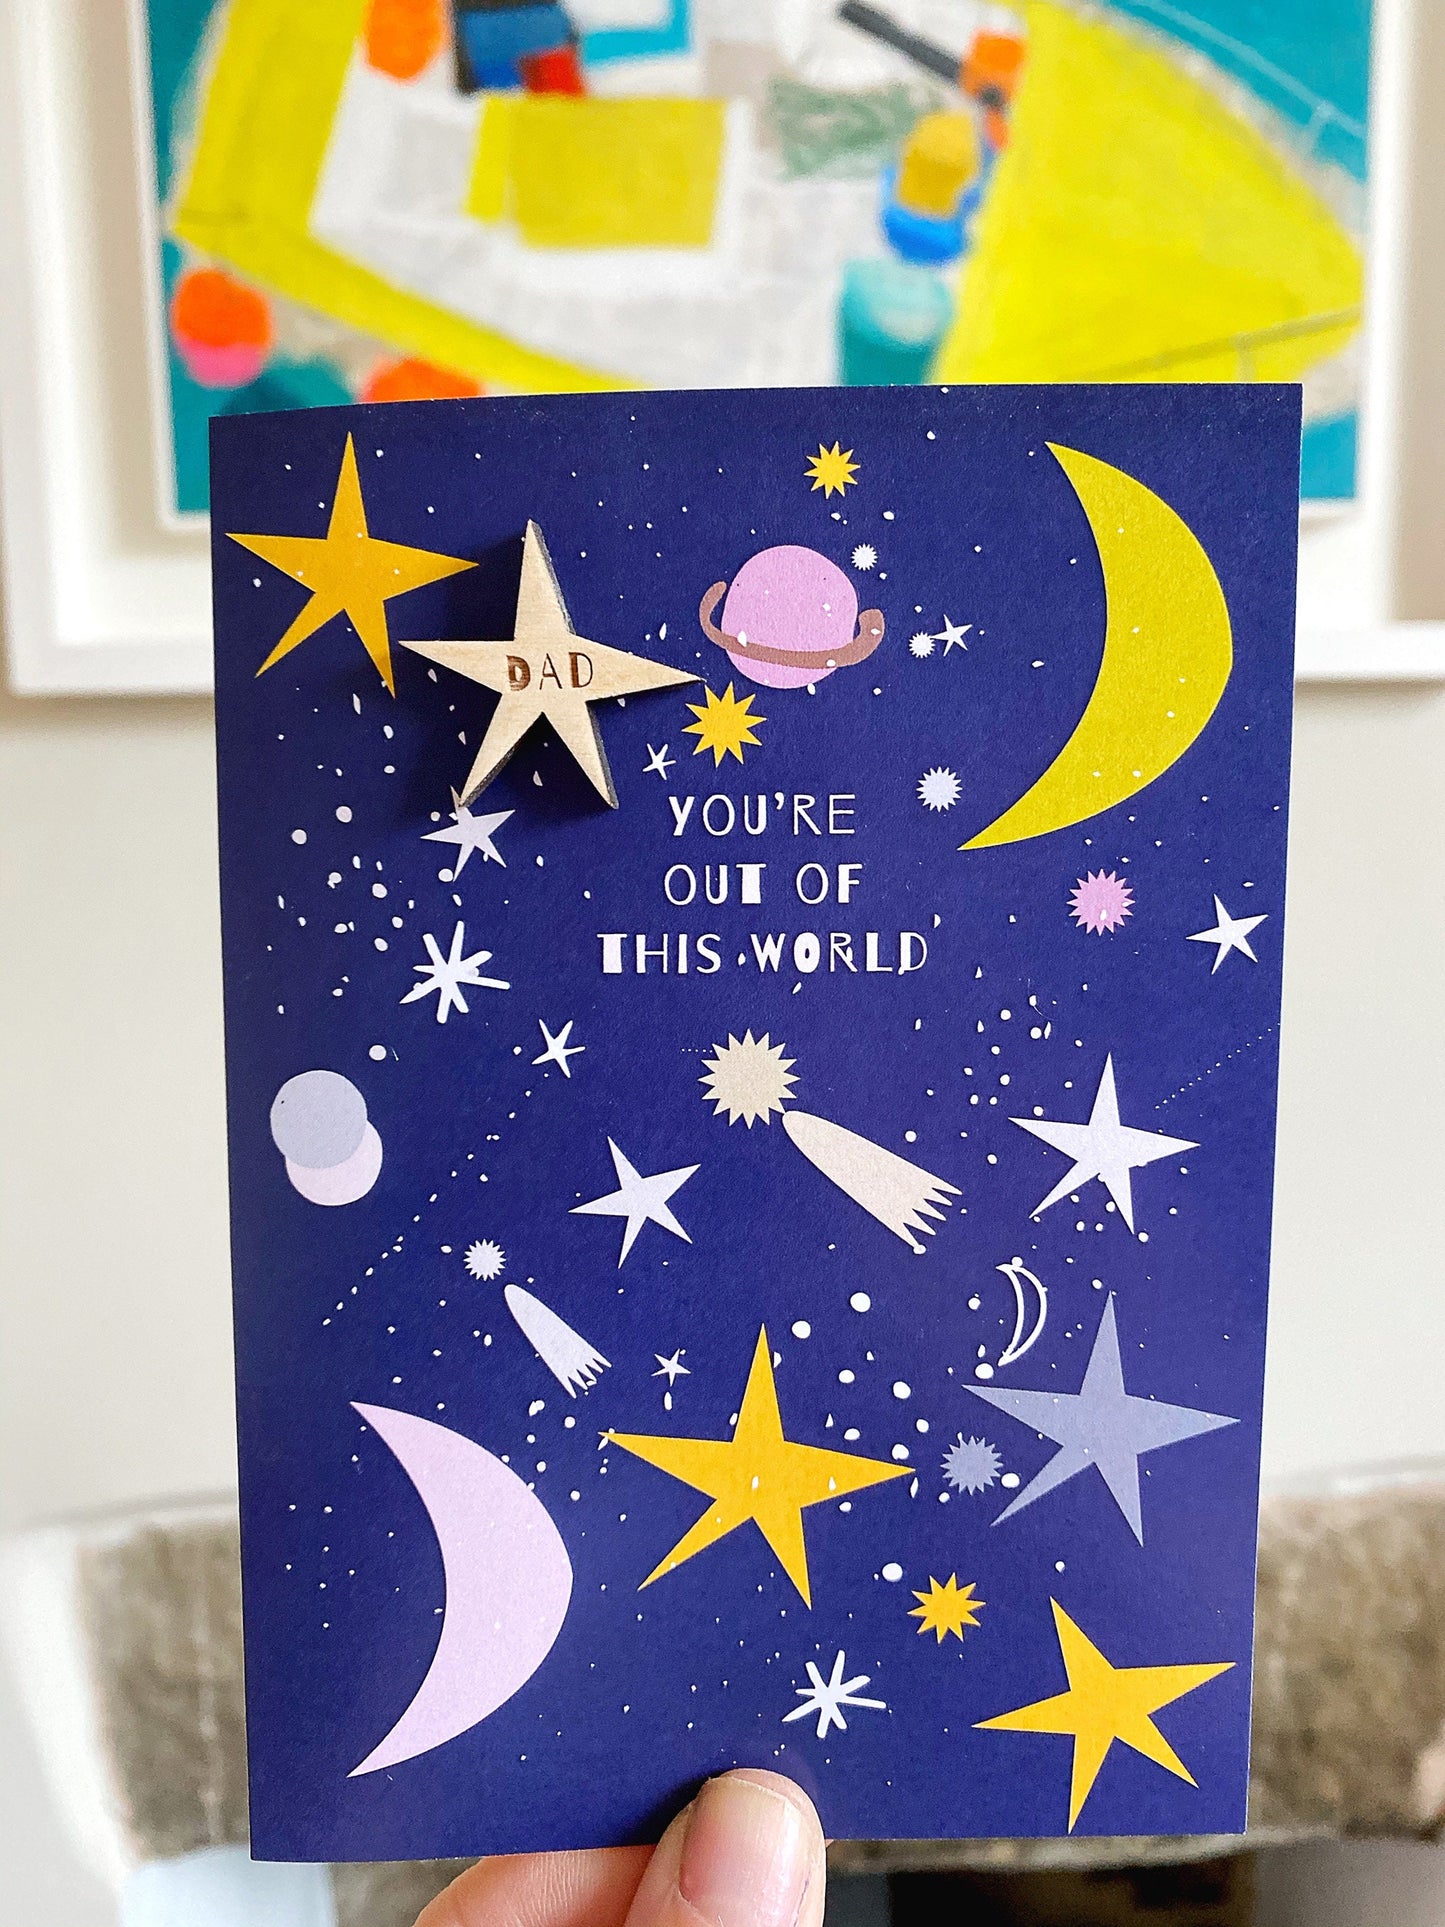 You're out of this world Father's Day greeting card